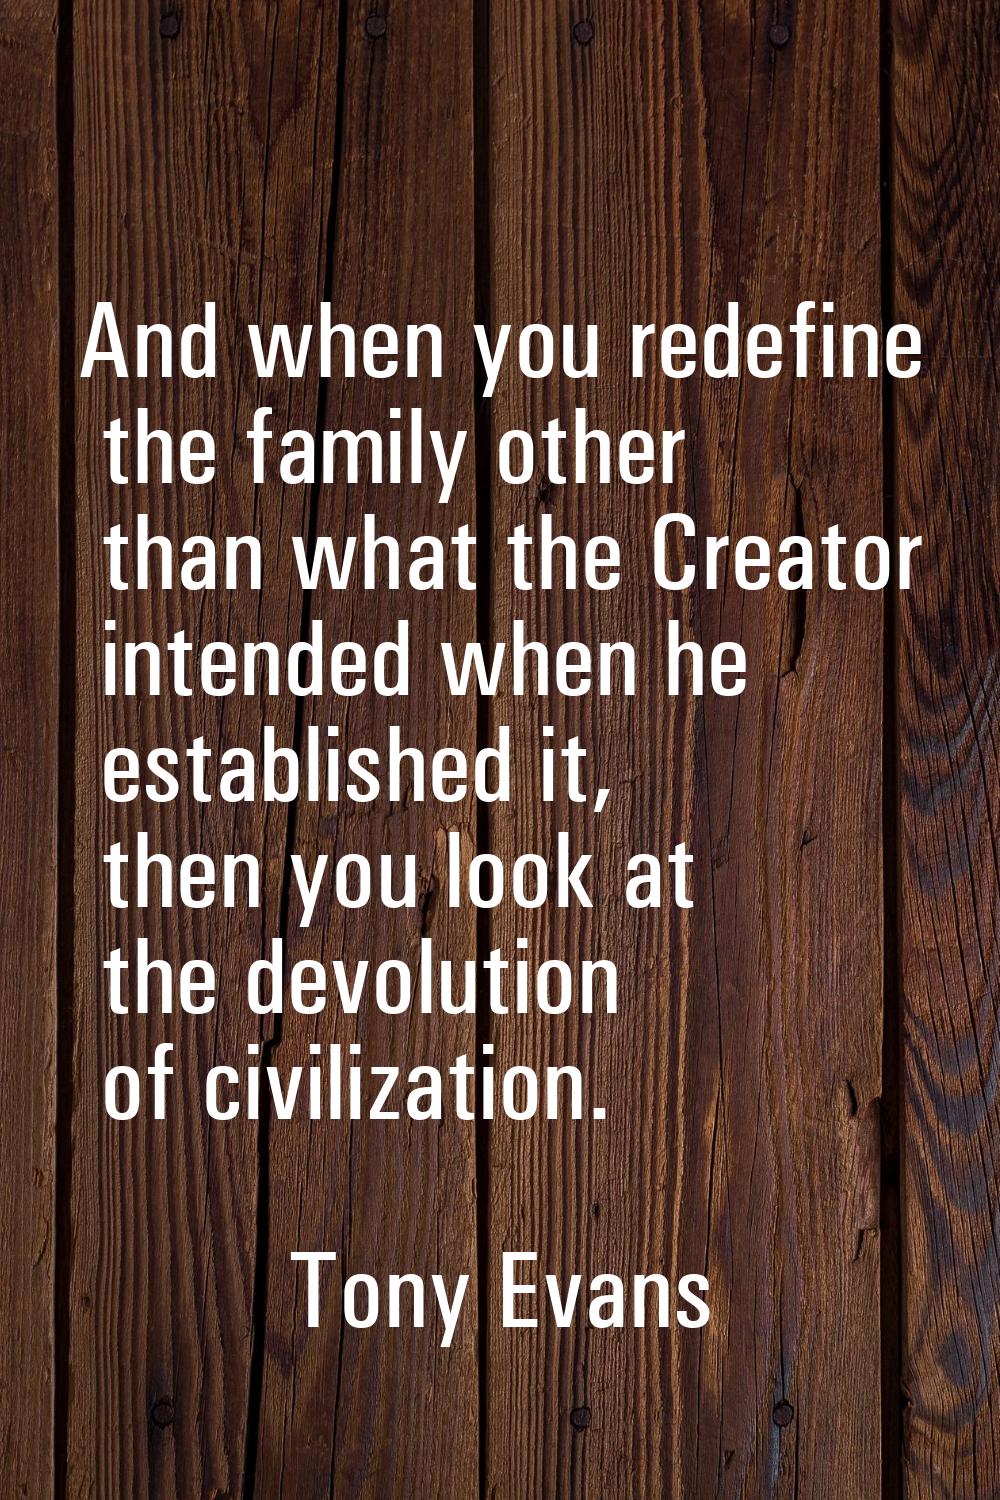 And when you redefine the family other than what the Creator intended when he established it, then 